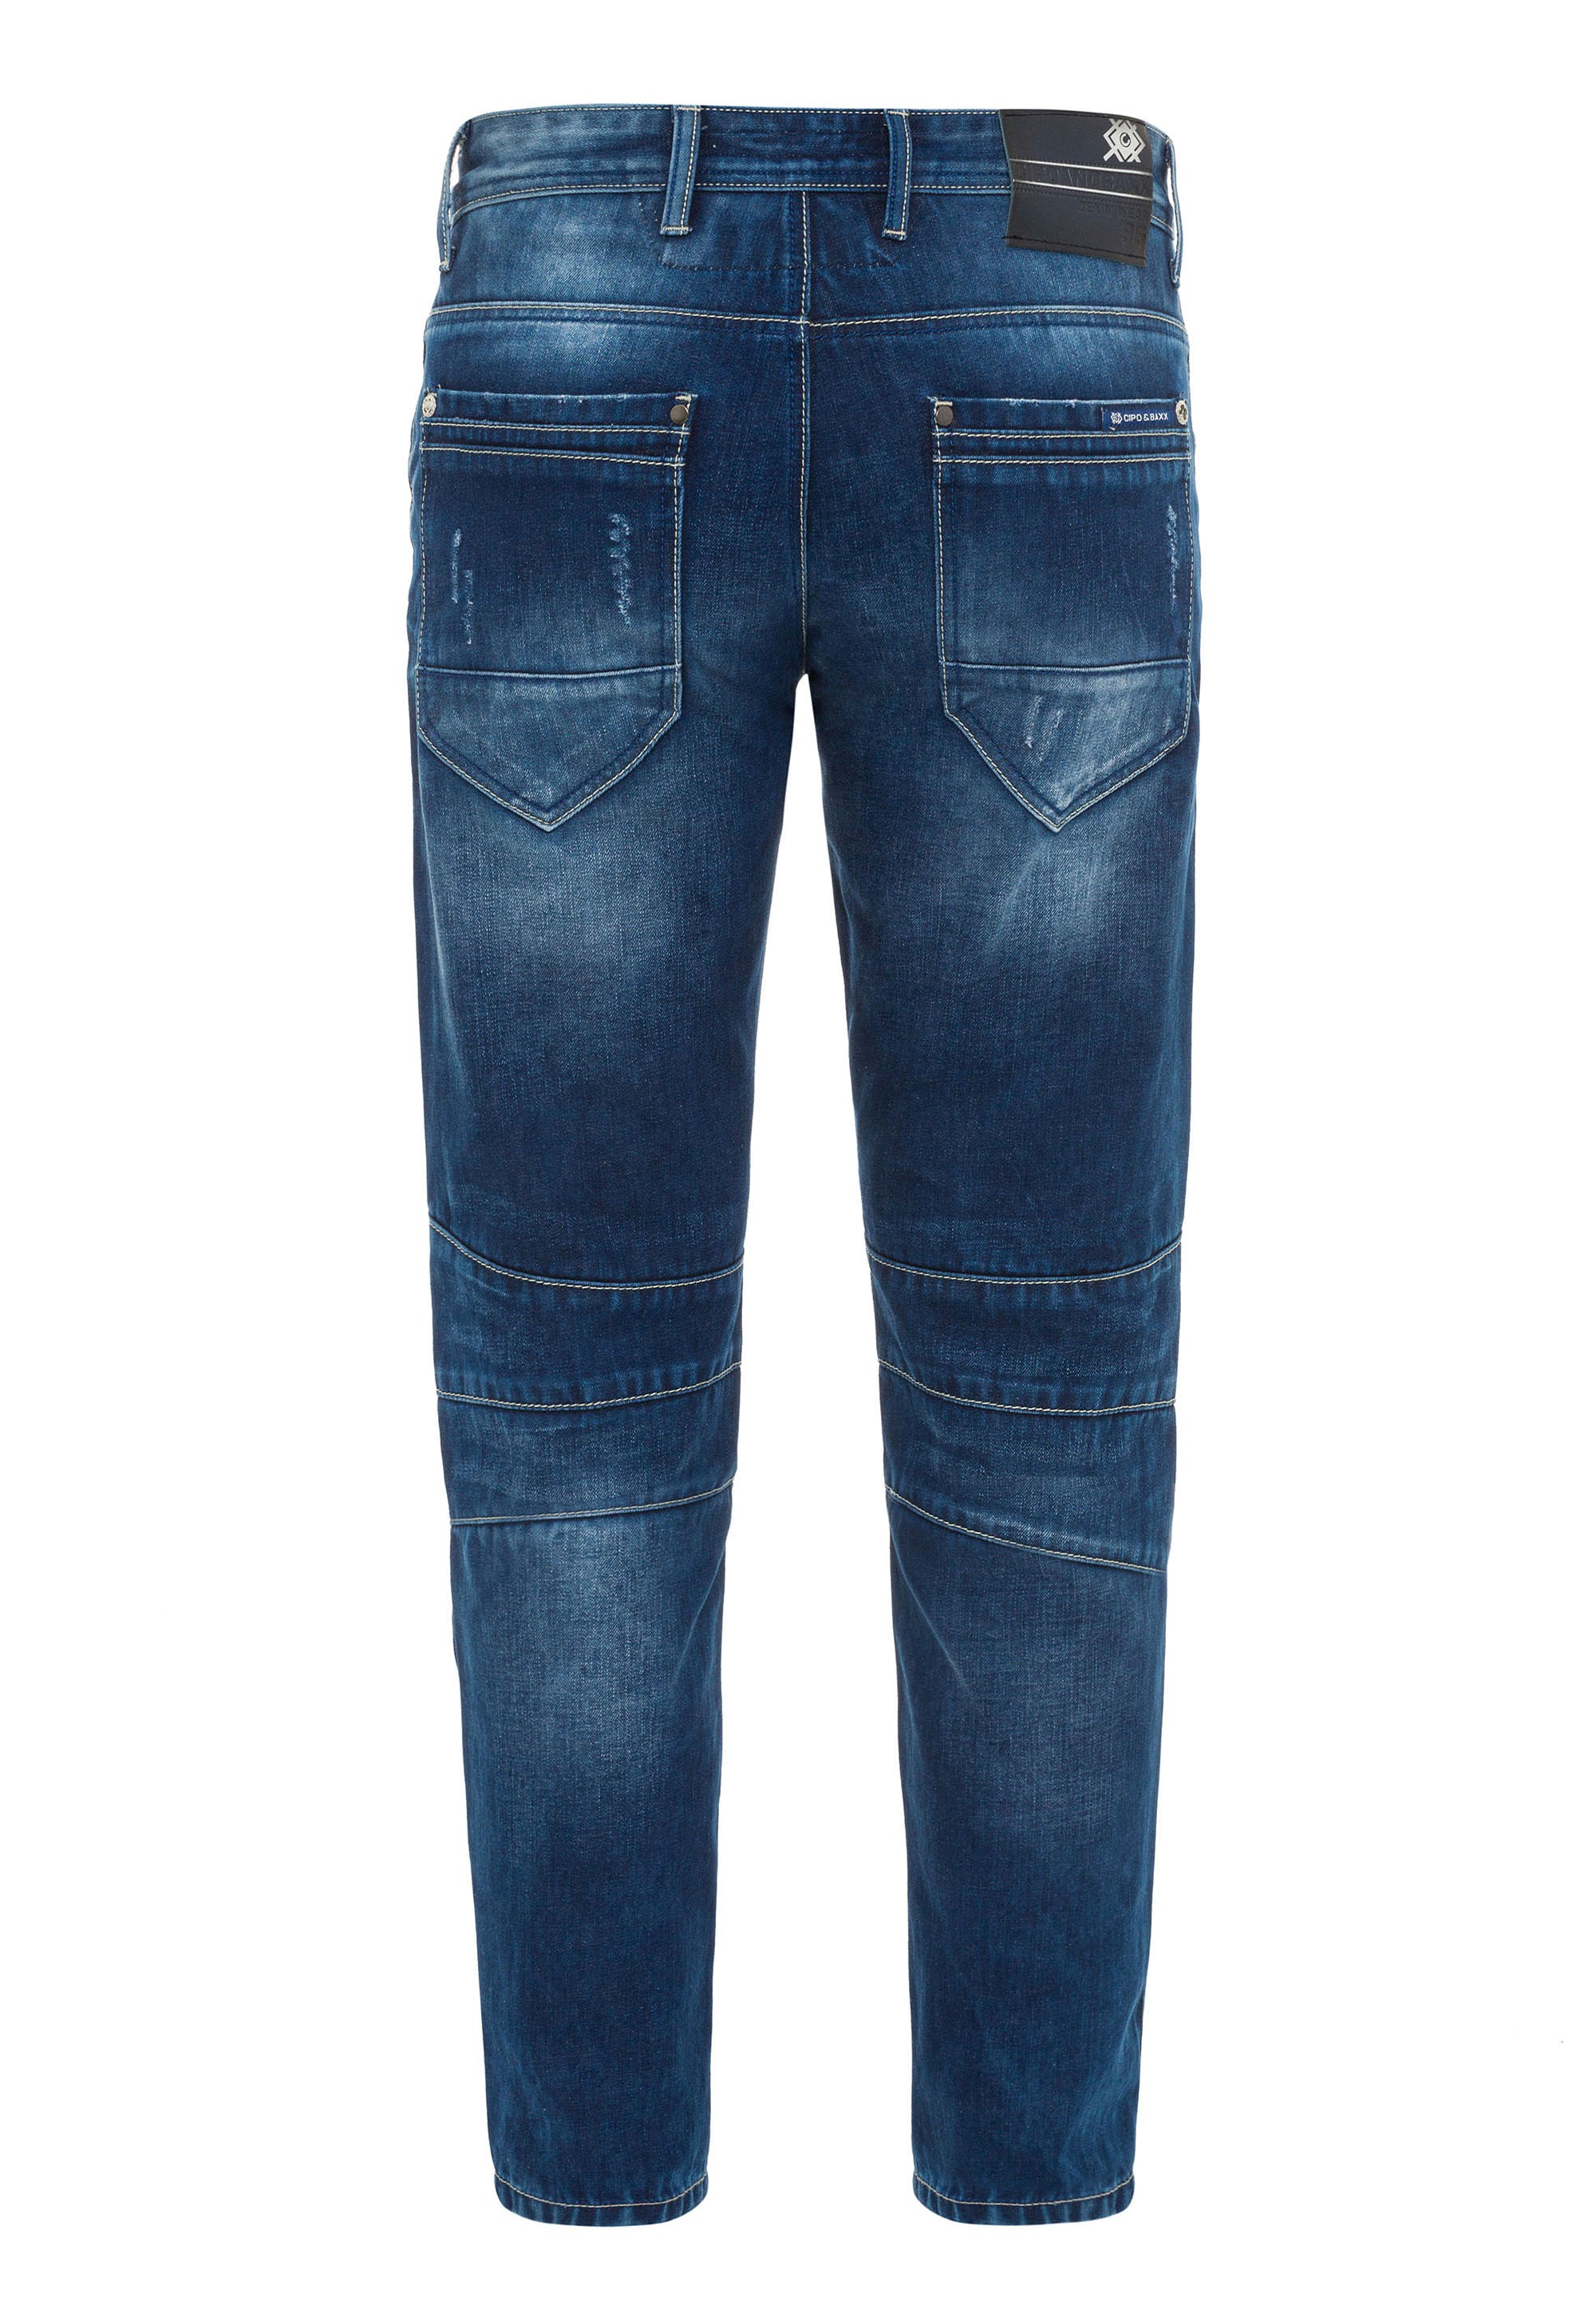 Cipo & Baxx Bequeme Jeans, in coolem Look